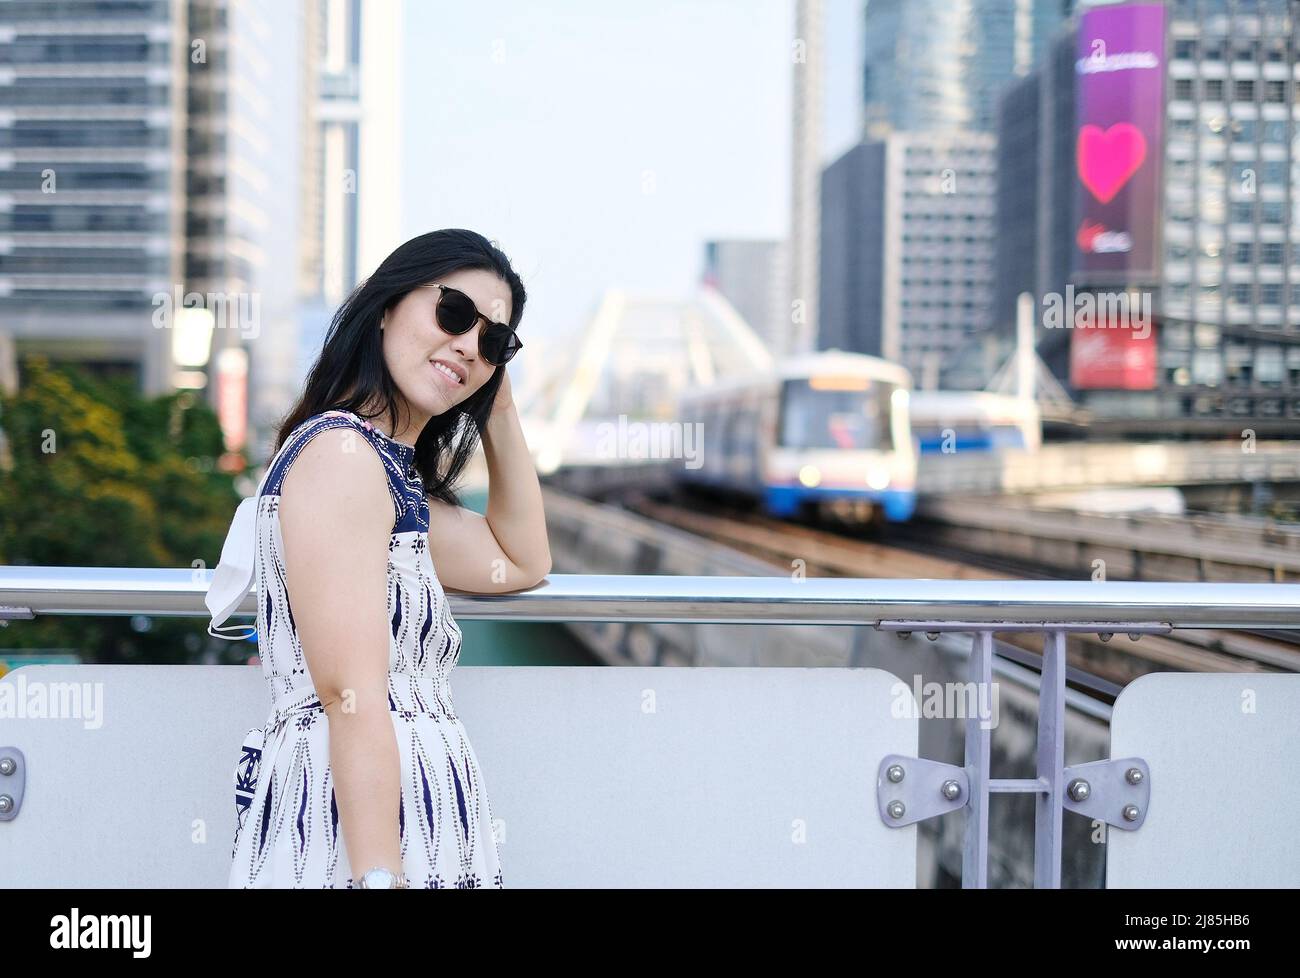 An Asian businesswoman is standing next to a walkway at a sky train station with the view of the incoming train on a track and the city skyline. Stock Photo